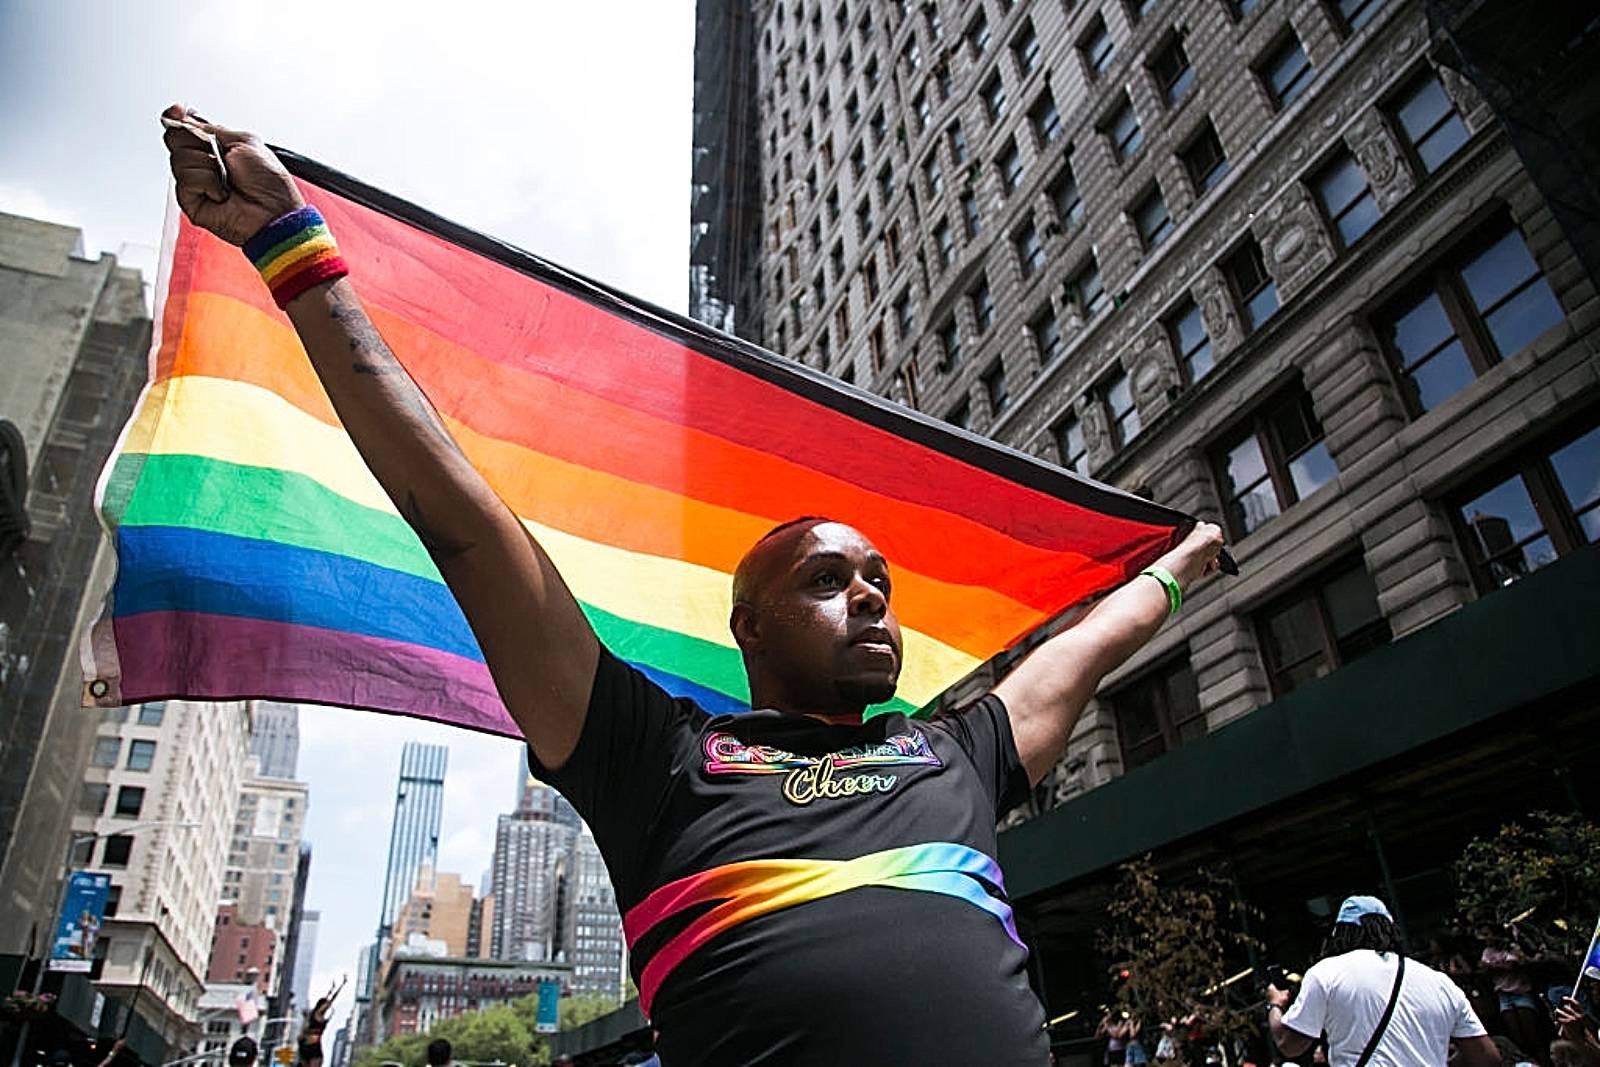 NEW YORK, NEW YORK - JUNE 27: A man with a flag walks during the Queer Liberation March parade on June 27, 2021 in New York City. Many participants walk around town to celebrate New York City Pride. The Queer Liberation March is an alternative Pride celebration free of police officers and major corporate sponsors. (Photo by Pablo Monsalve / VIEWpress via Getty Images)